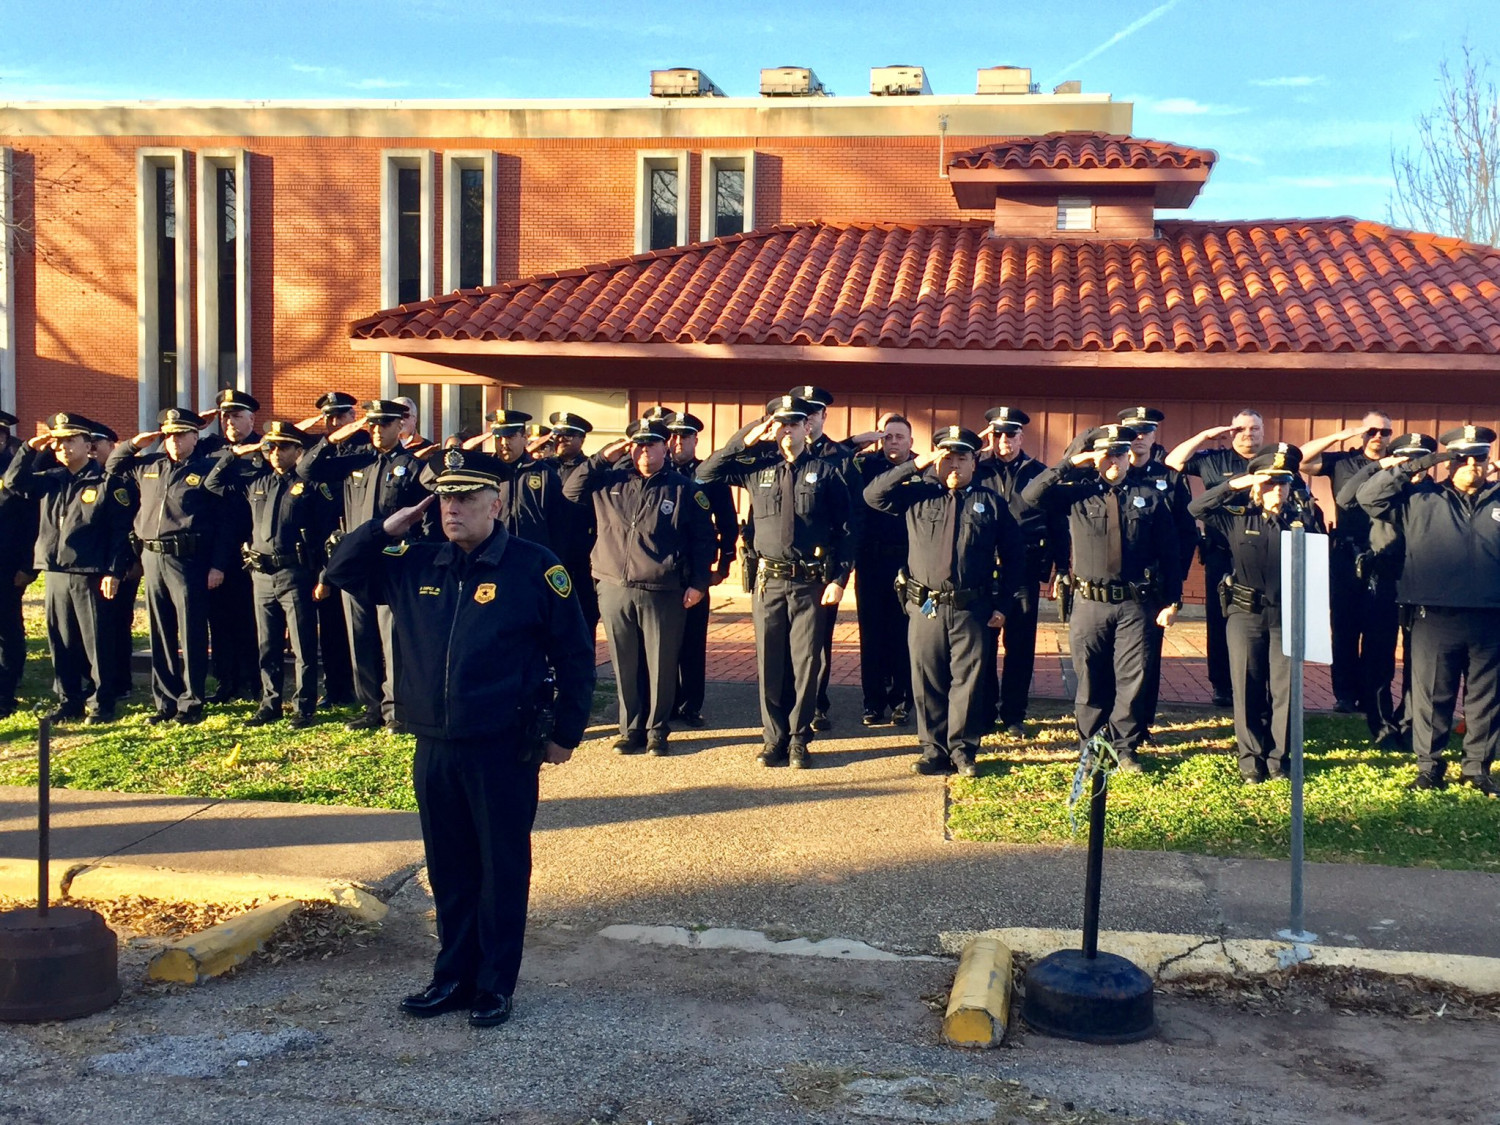 Officer salute outside the prison during the execution of Robert Jennings.